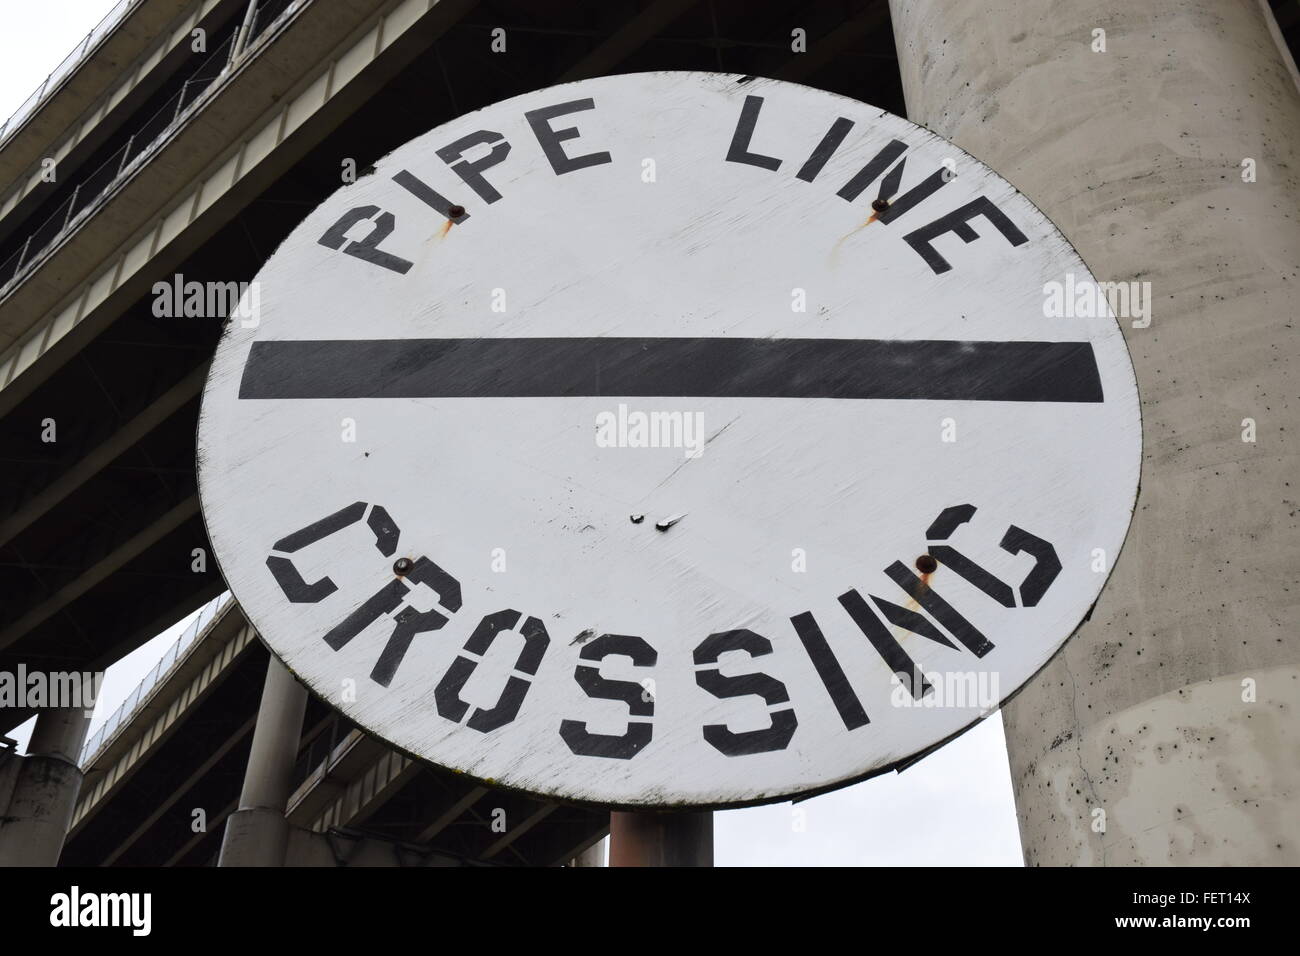 Pipe line crossing sign. Stock Photo